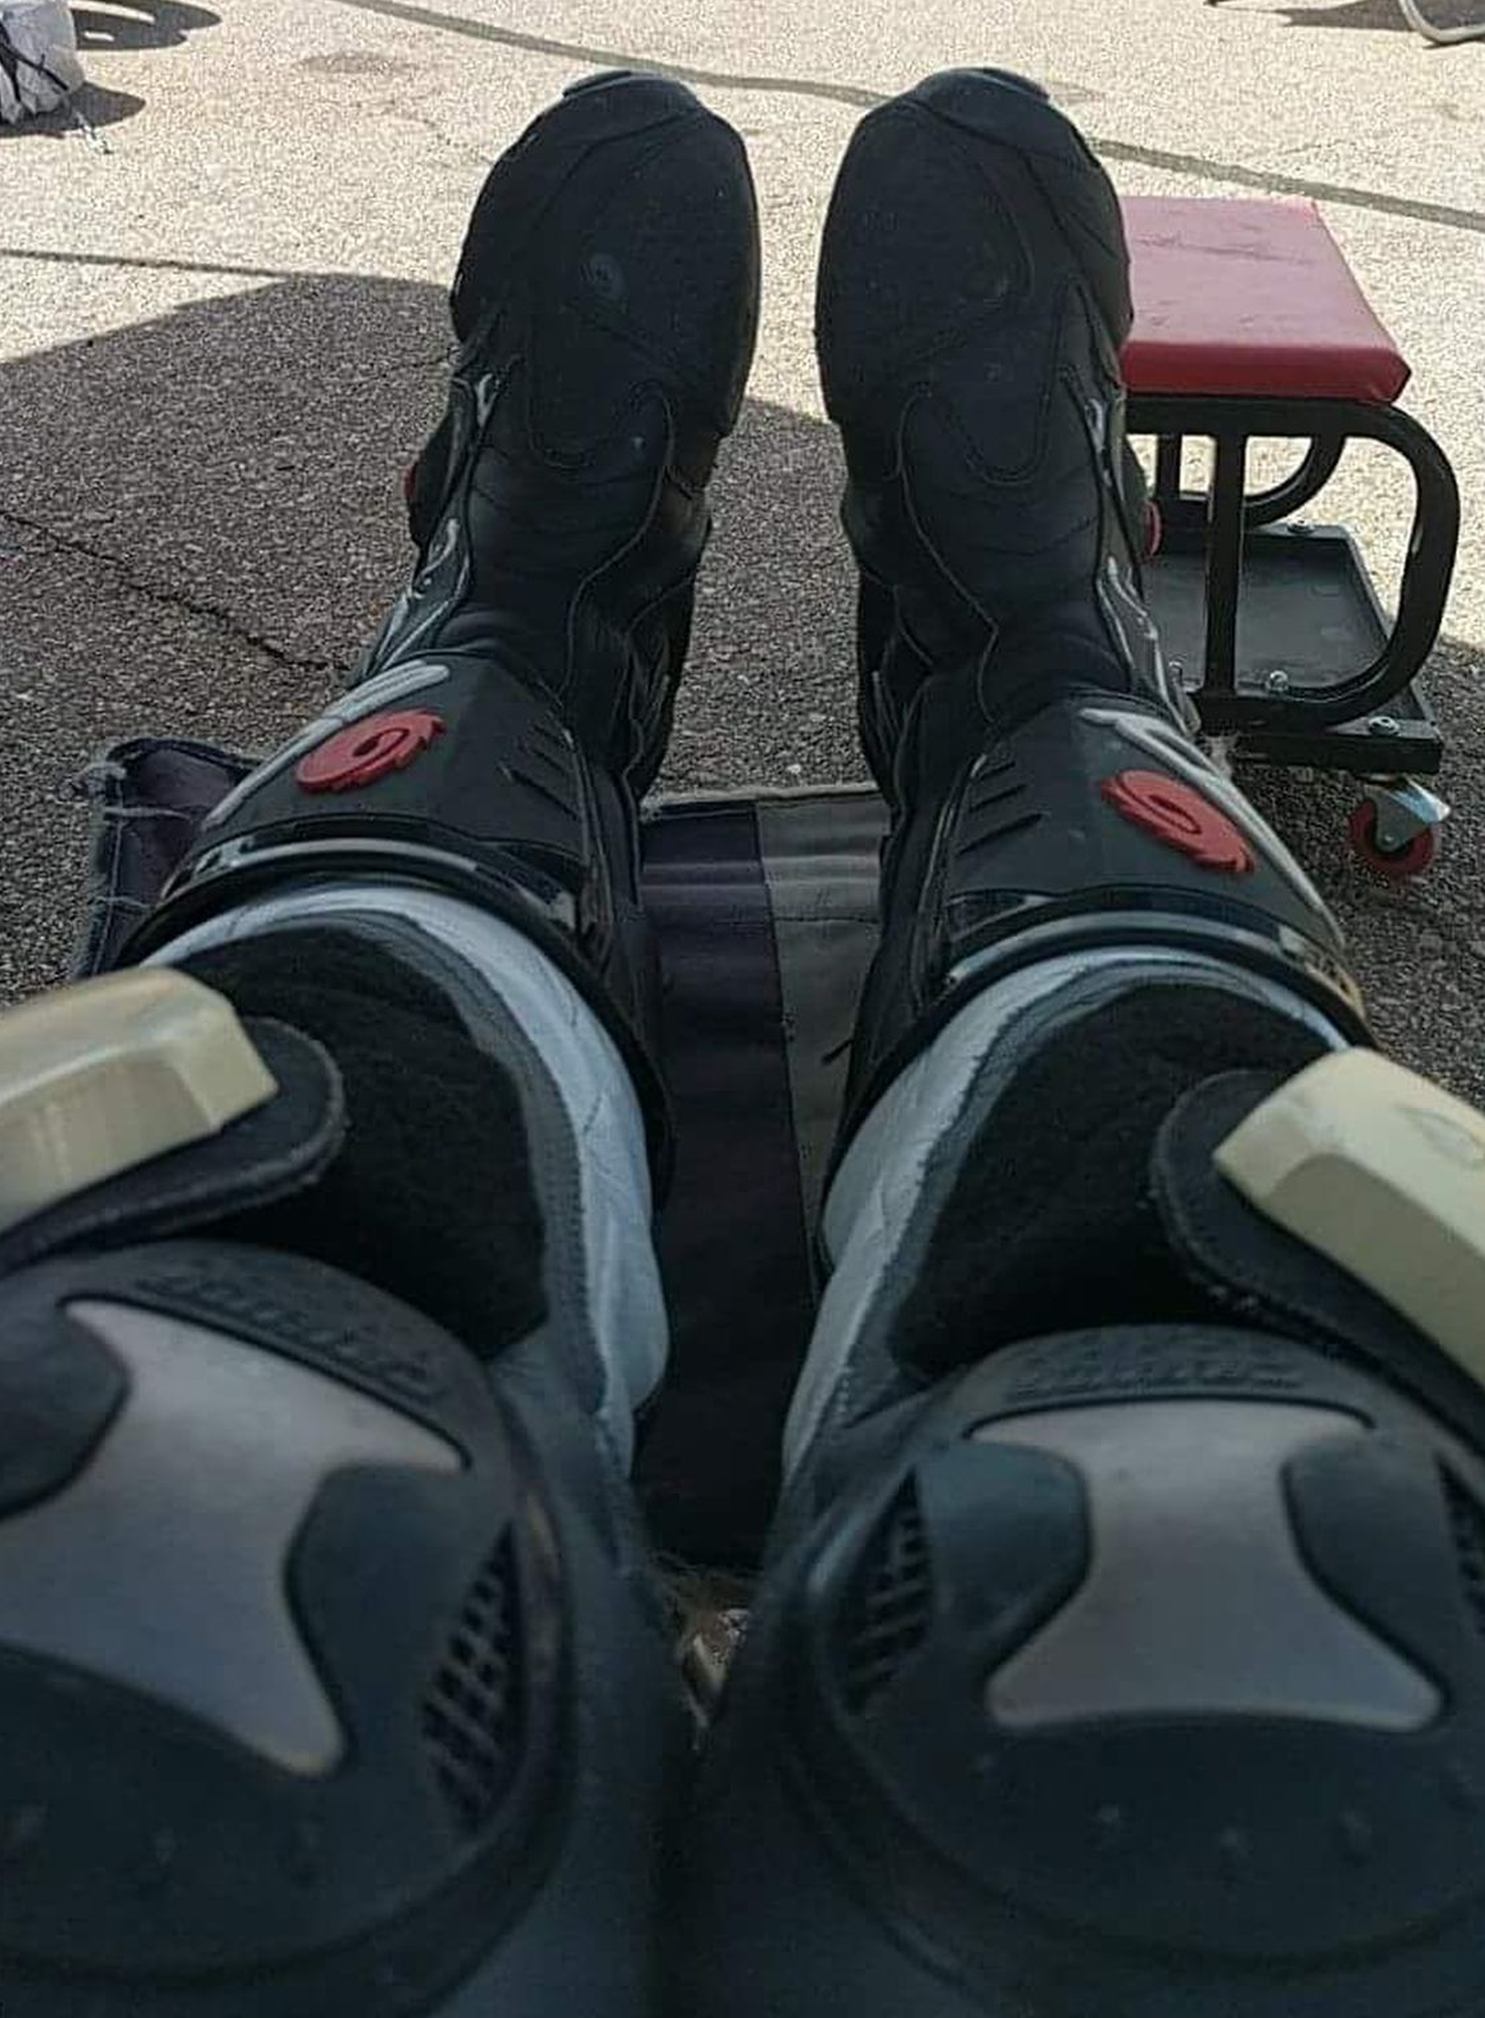 A mans legs extending from the foreground, dressed in armored knee pads and shin guards, with heavy duty sport/MX boots on his feet. Thick "drag pads" adorn the knees.